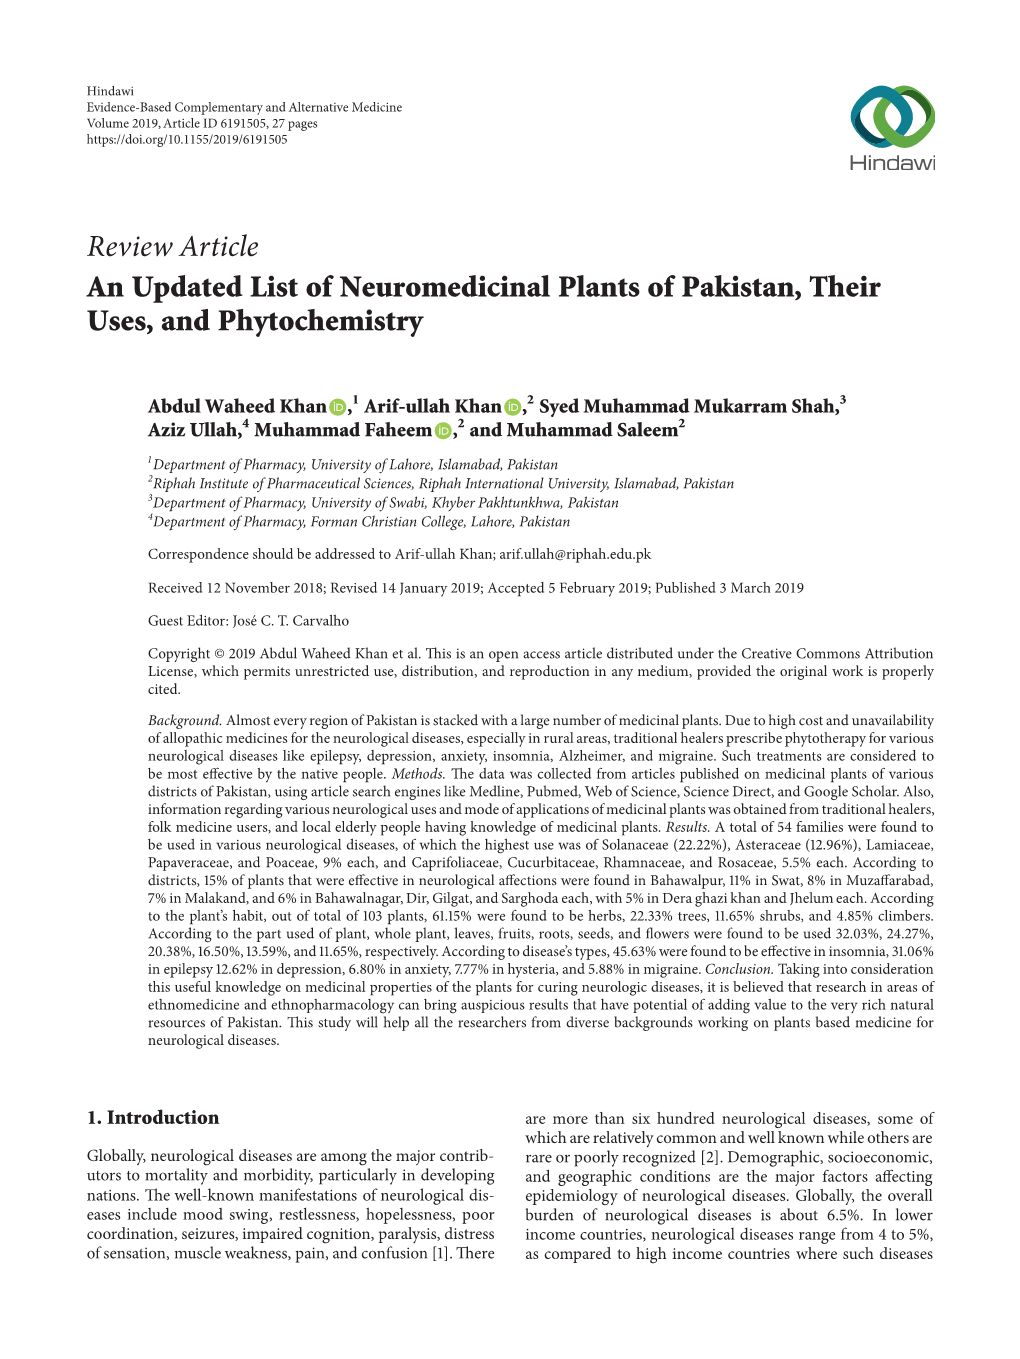 An Updated List of Neuromedicinal Plants of Pakistan, Their Uses, and Phytochemistry